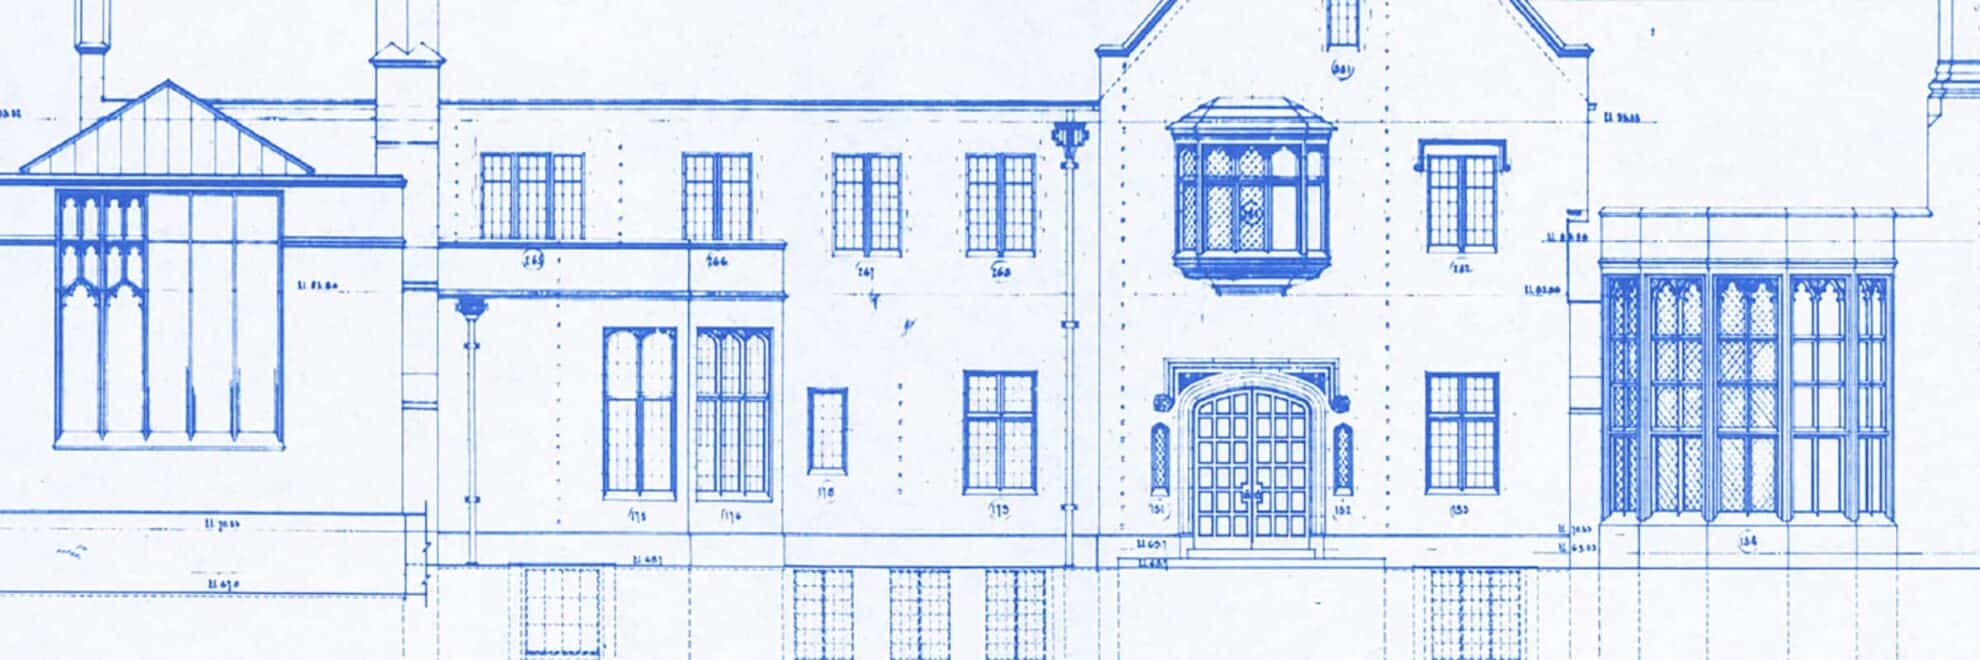 Blueprints of the Paine mansion